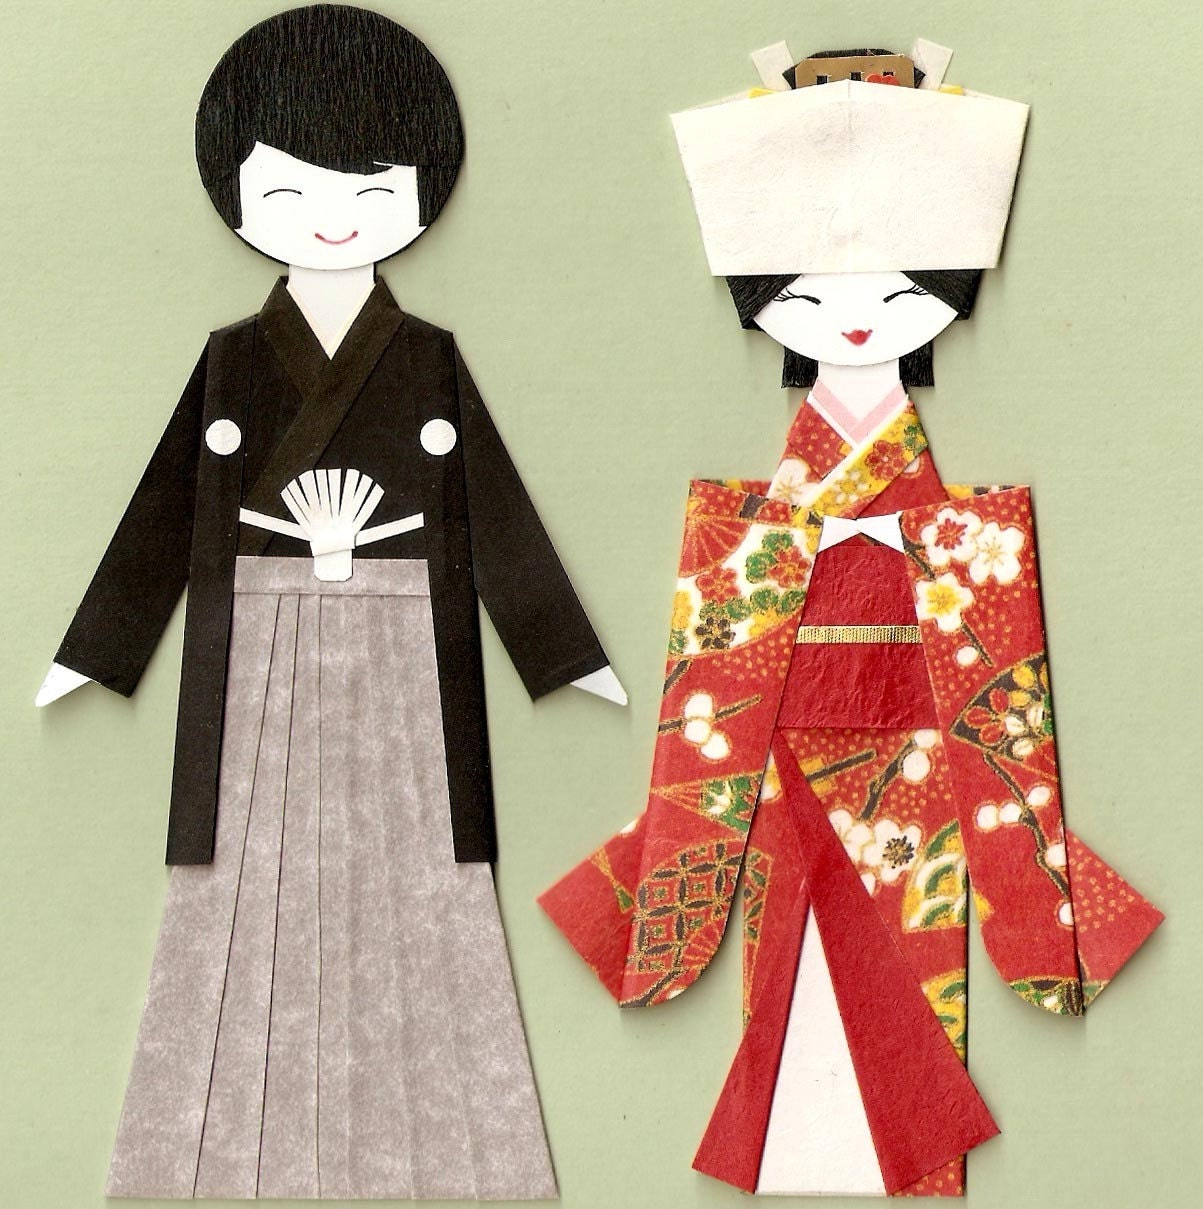 JAPANESE WEDDING BRIDE AND GROOM ORIGAMI PAPER DOLL CARD